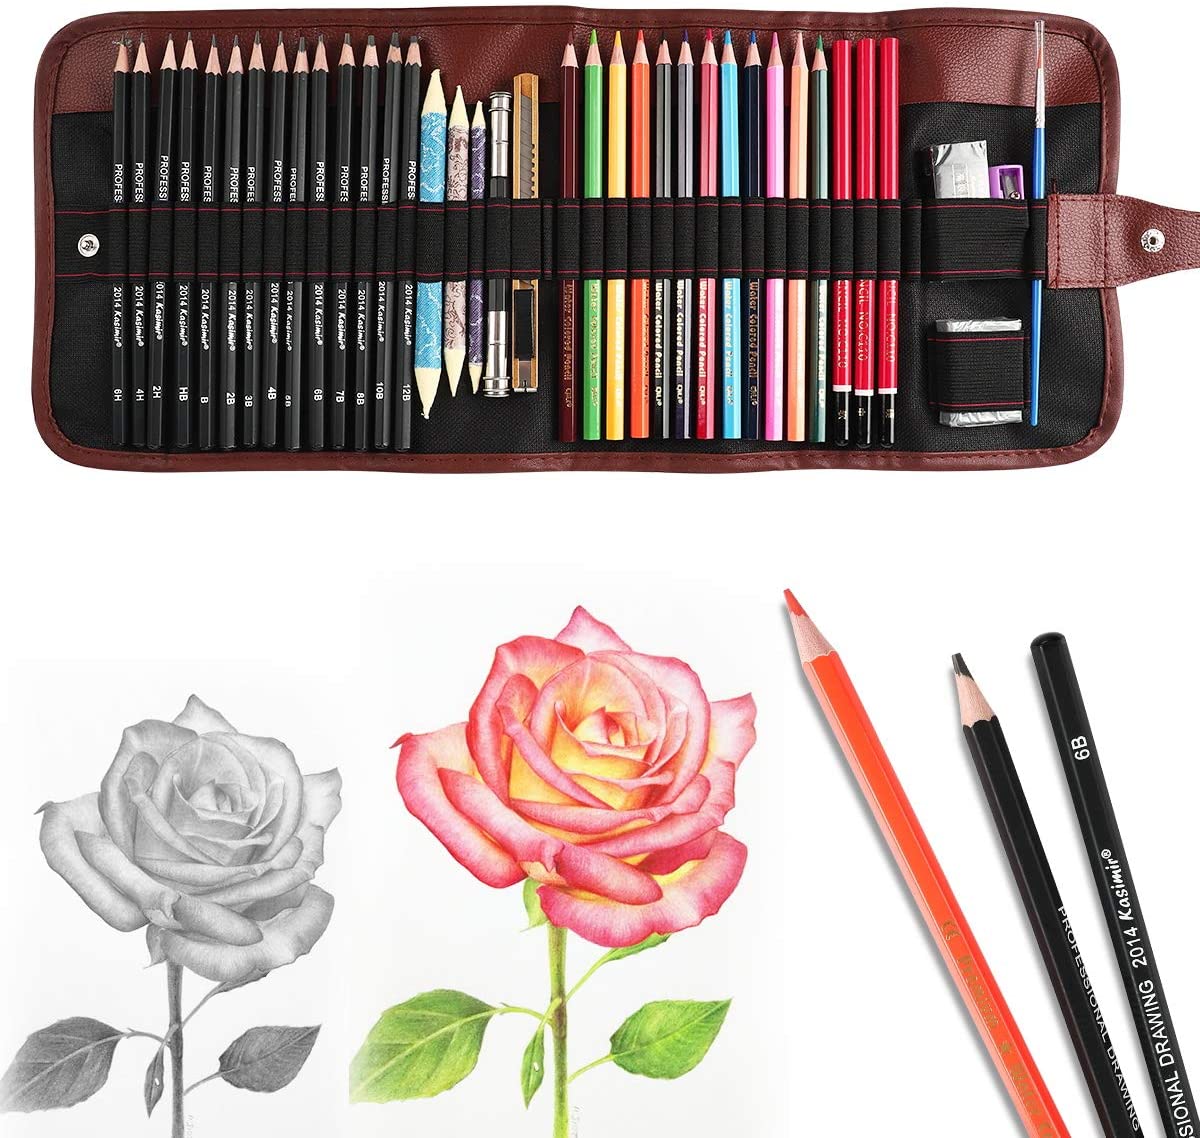 Sketch Painting Art Supplies Set,39 Drawing Pencils Watercolor Pencils  Sketching Tools Kit with Graphite Pencils, Charcoal Pencils, Watercolor  Pencils,Paper Erasable Pen, Great Gift